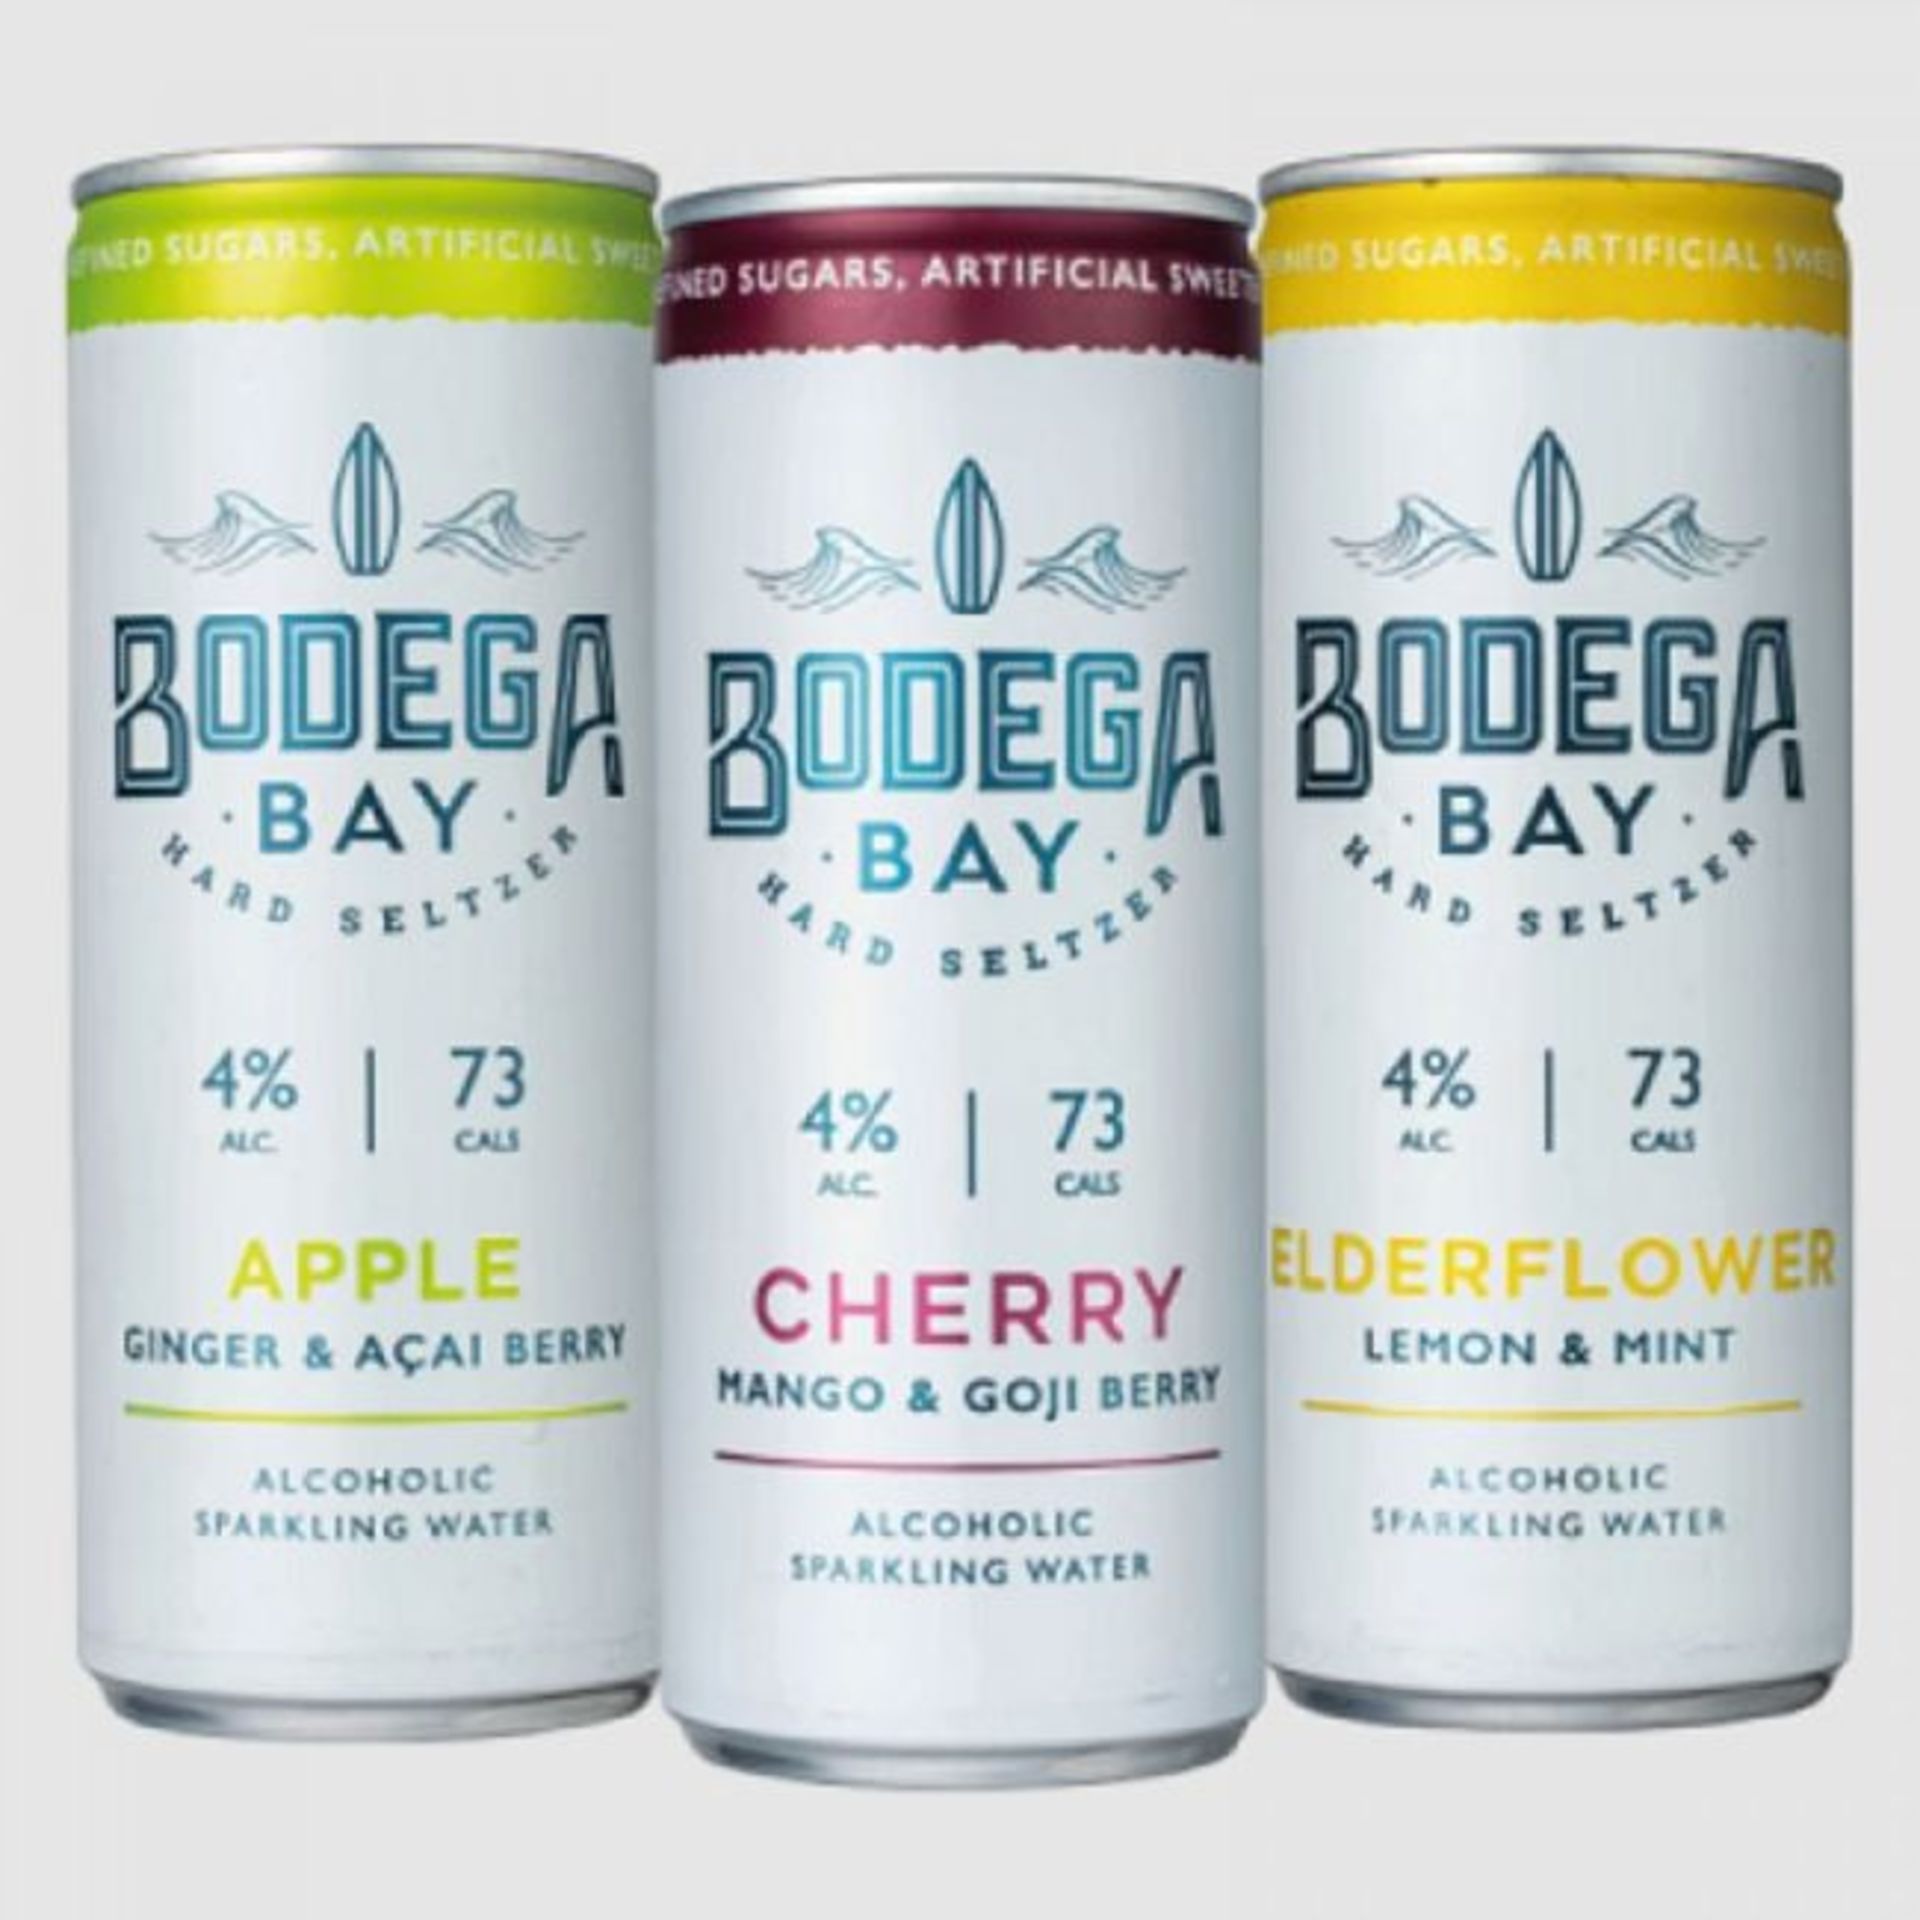 1,080 x Cans of Bodega Bay Hard Seltzer 250ml Alcoholic Sparkling Water Drinks - RESALE JOB LOT - - Image 6 of 21